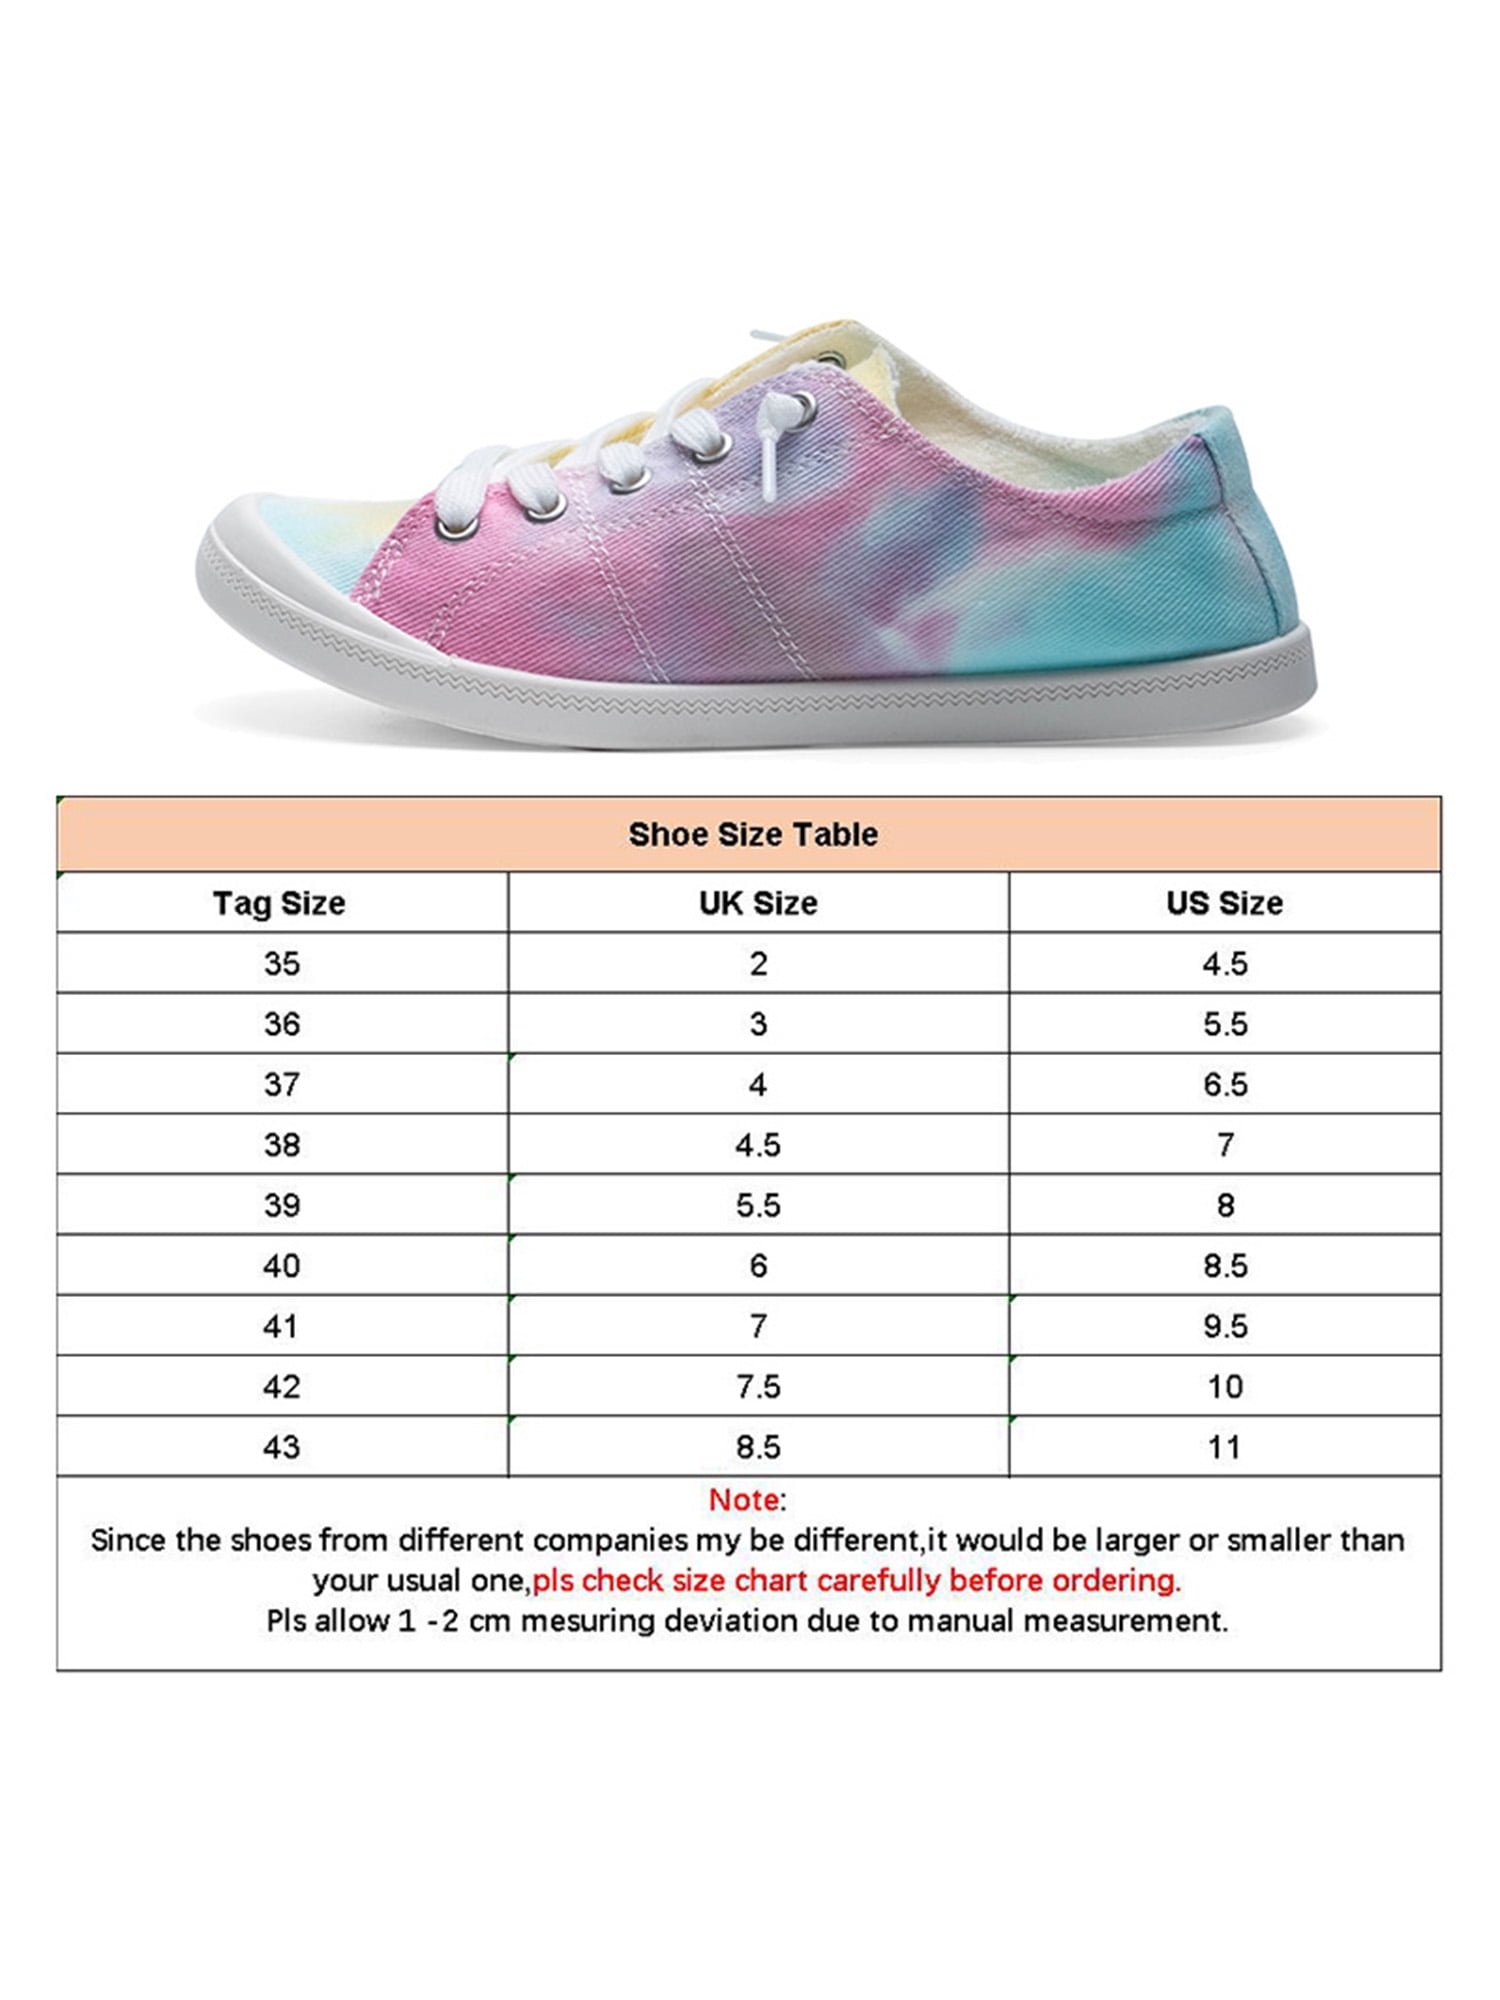 UK WOMENS LADIES FLAT SLIP ON PLIMSOLL SNEAKERS TRAINERS SKATER SHOES PUMPS SIZE 